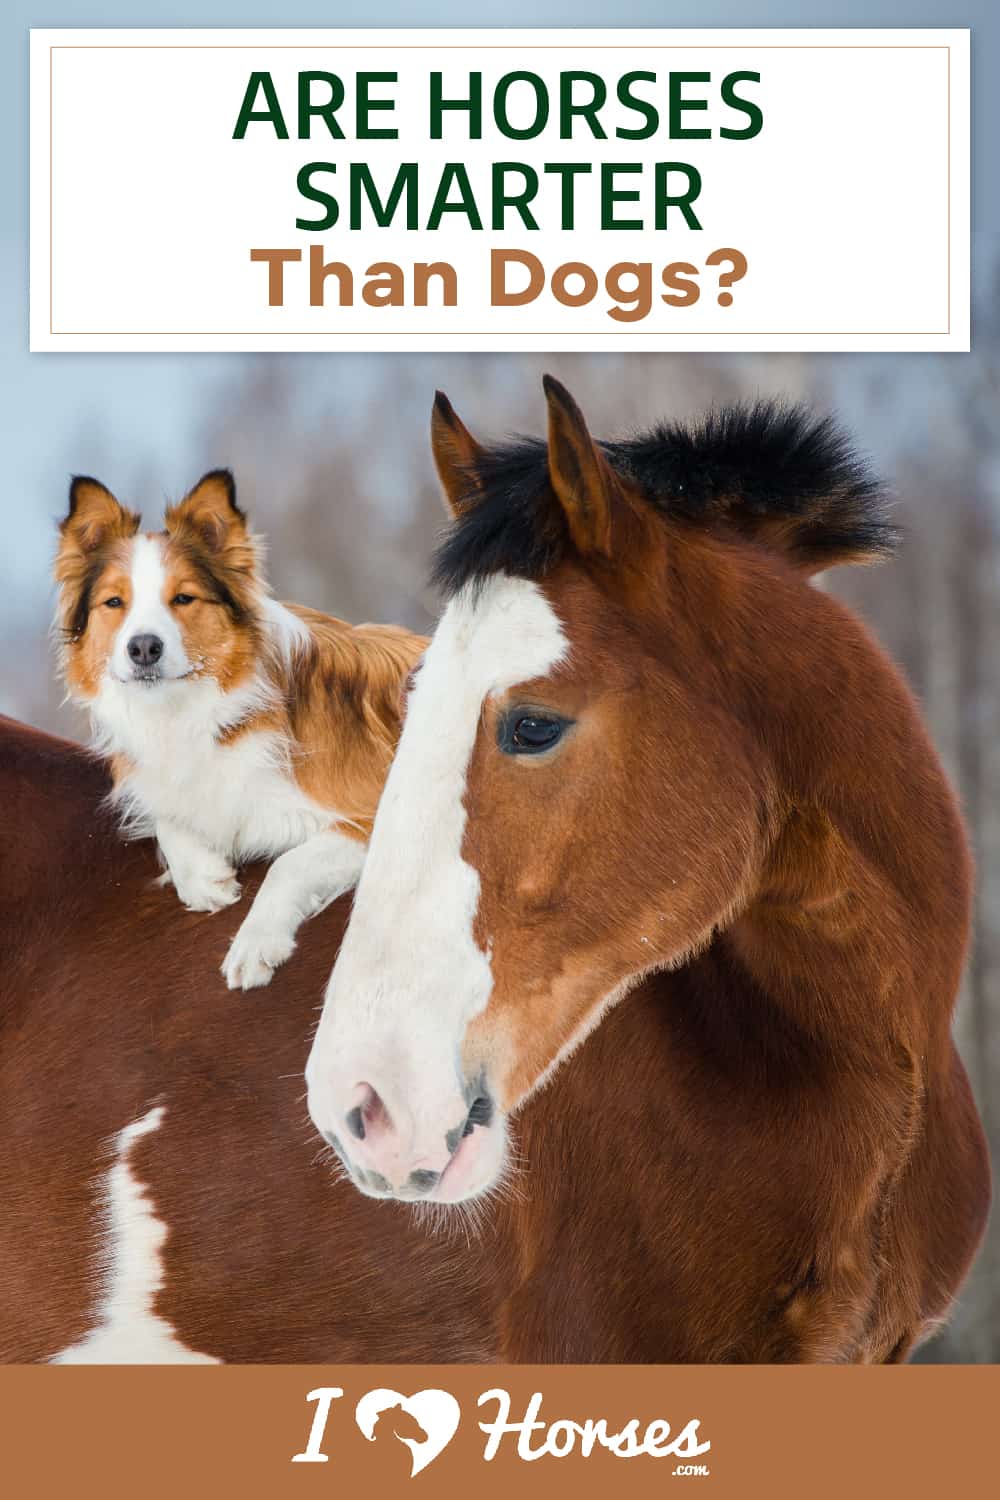 Are Horses Smarter Than Dogs-01-02, horse and dog, horse and dog friends